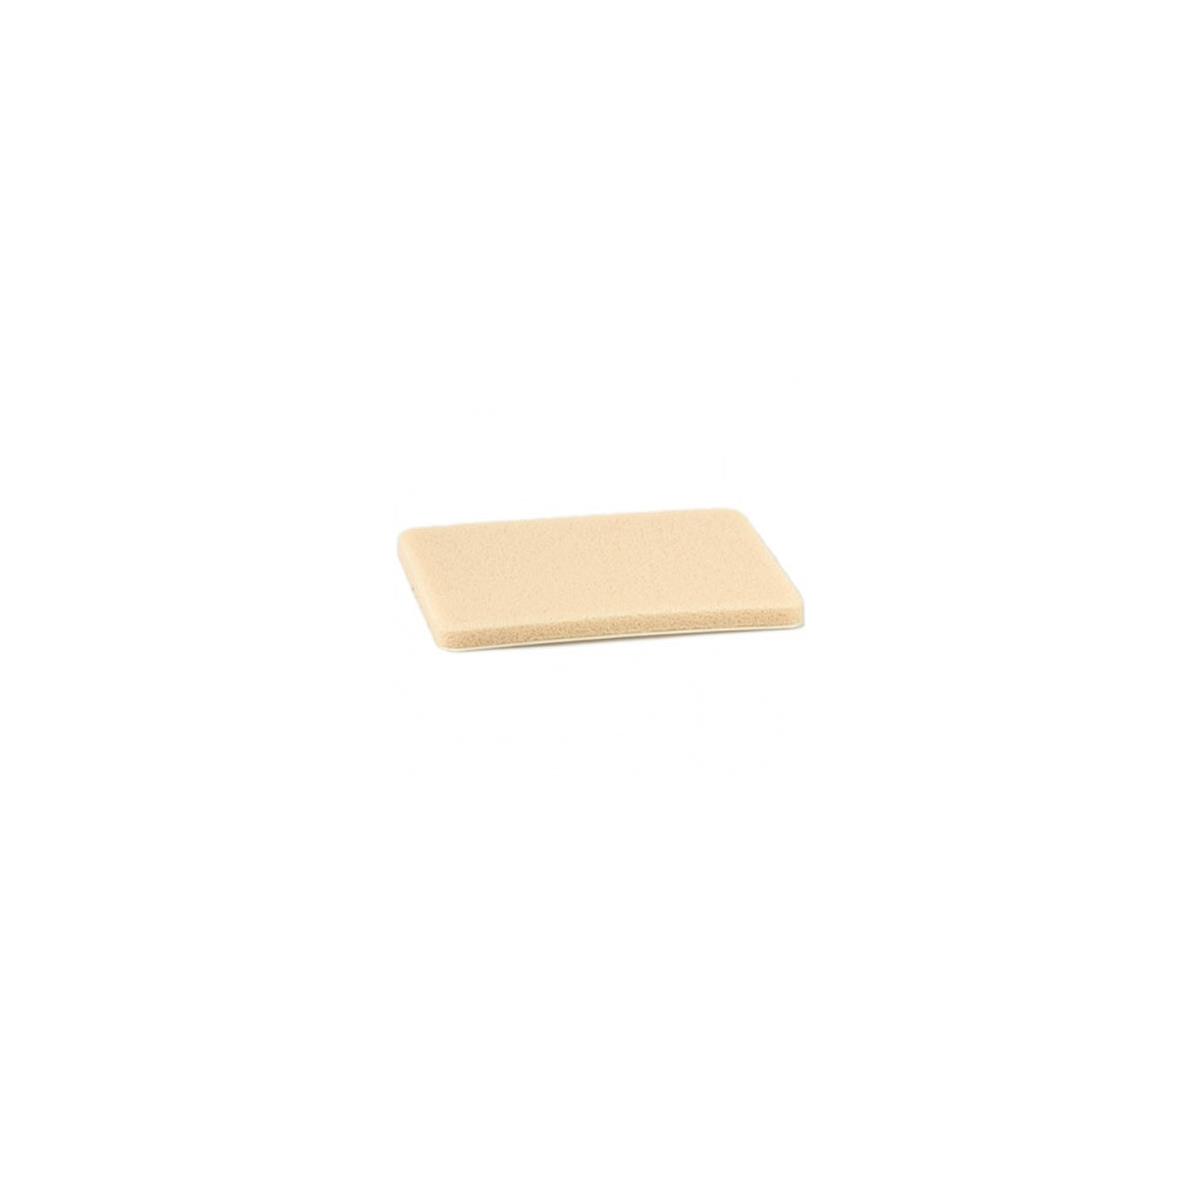 Image of Lectrosonics 35924 Thermal Insulation Pad